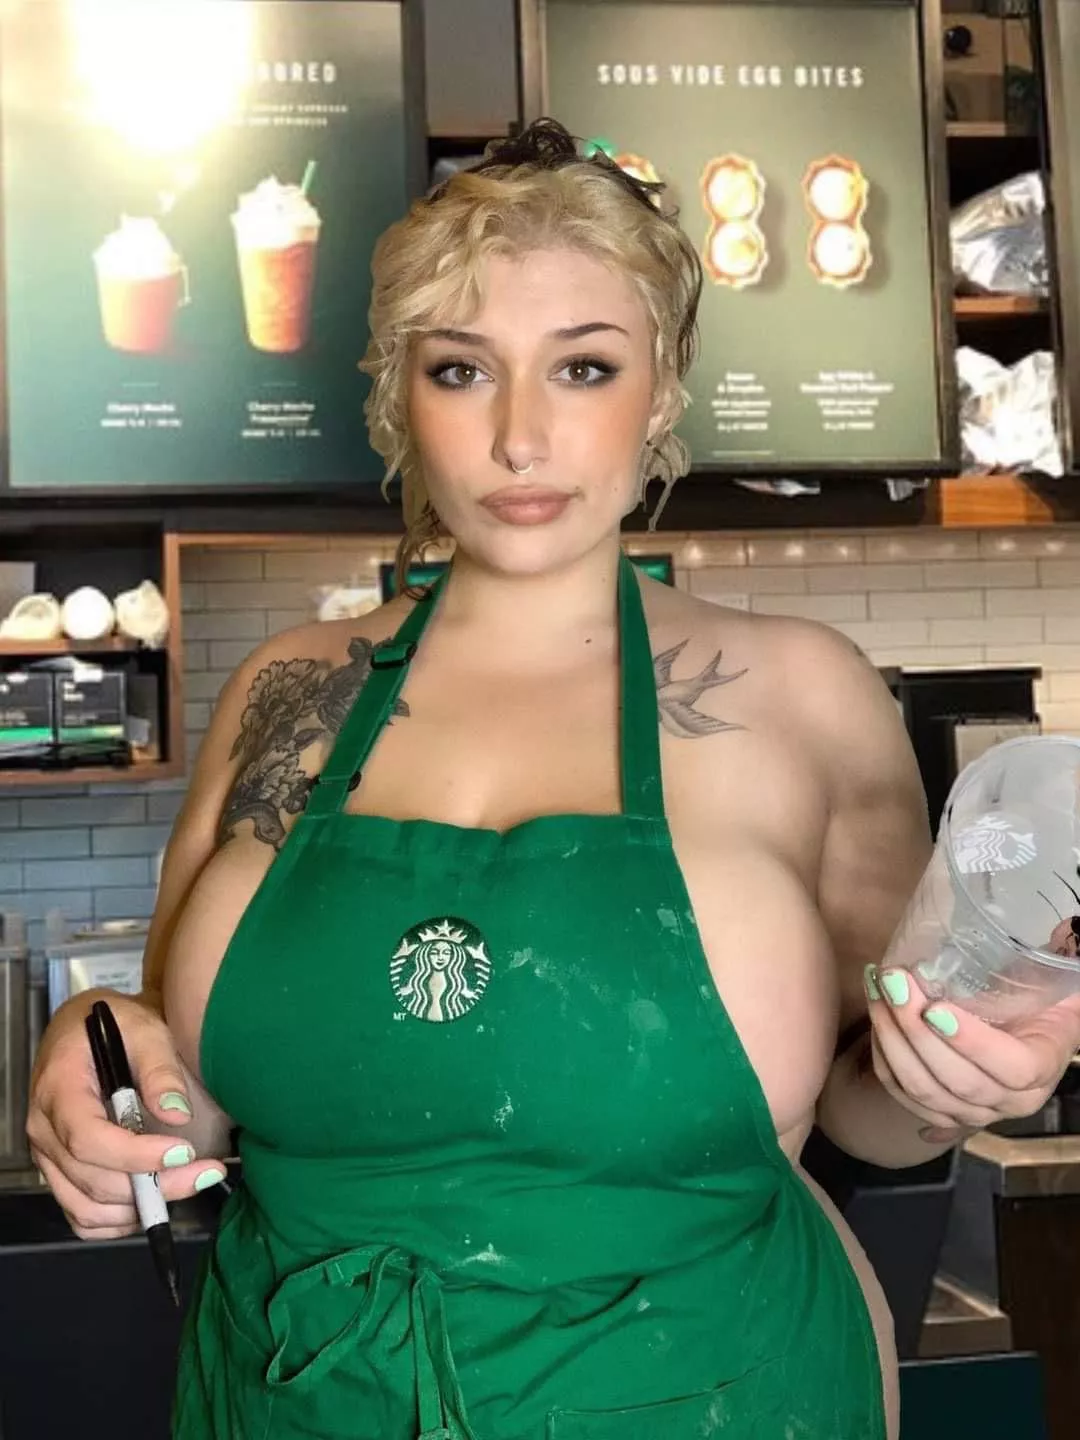 Iced latte with breast milk porn